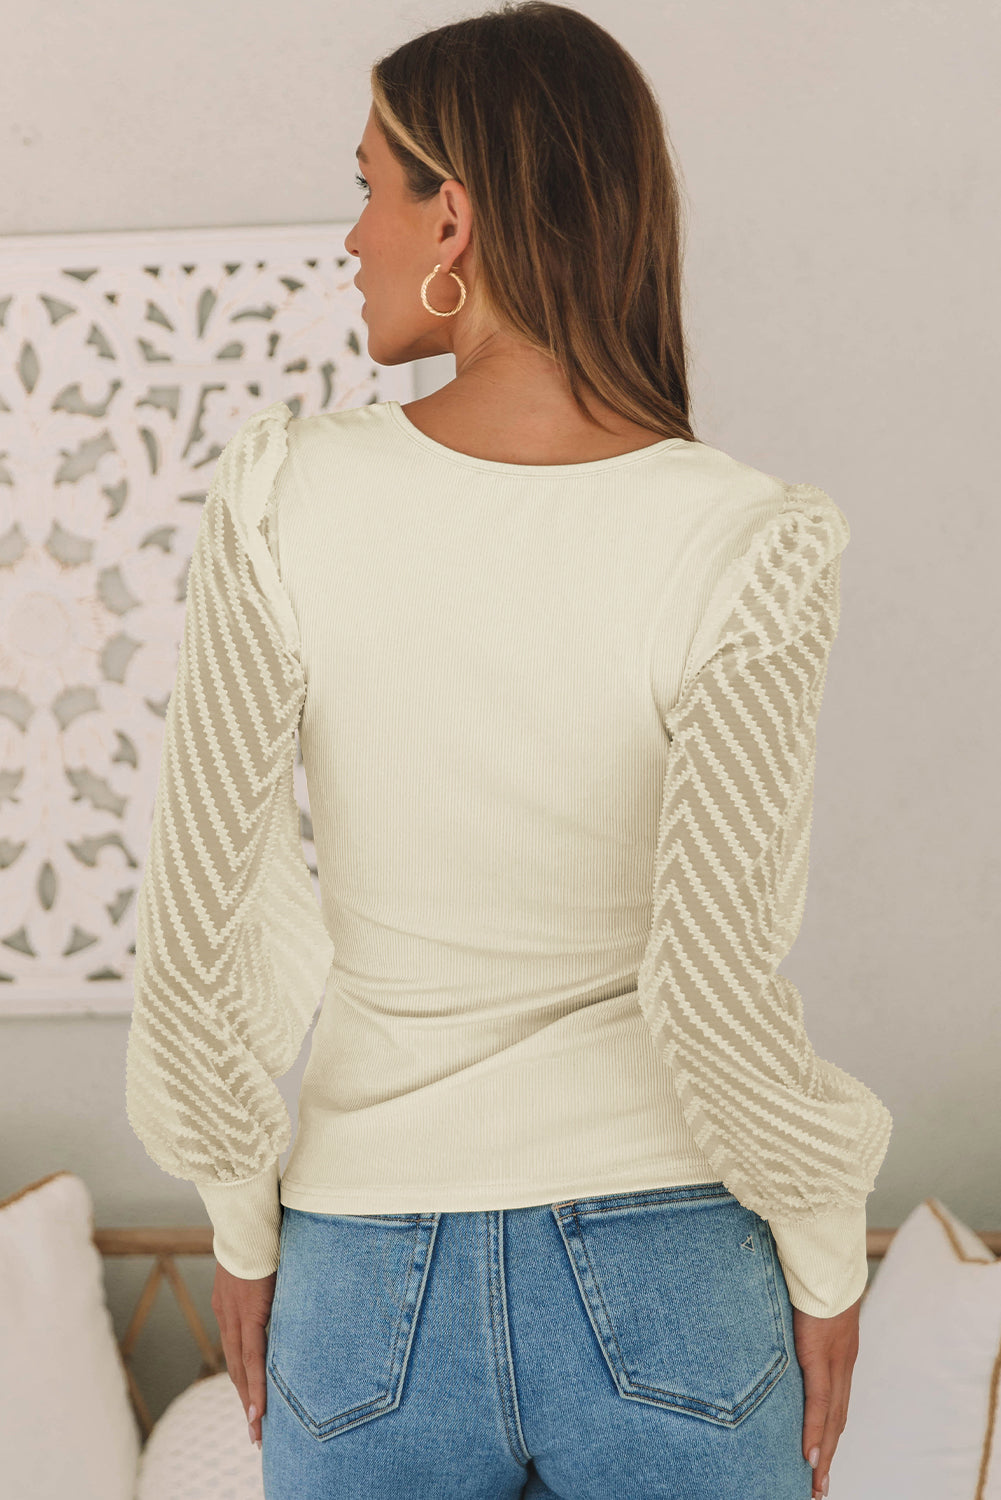 Apricot Delicate Textured Mesh Sleeve Ribbed Knit Top